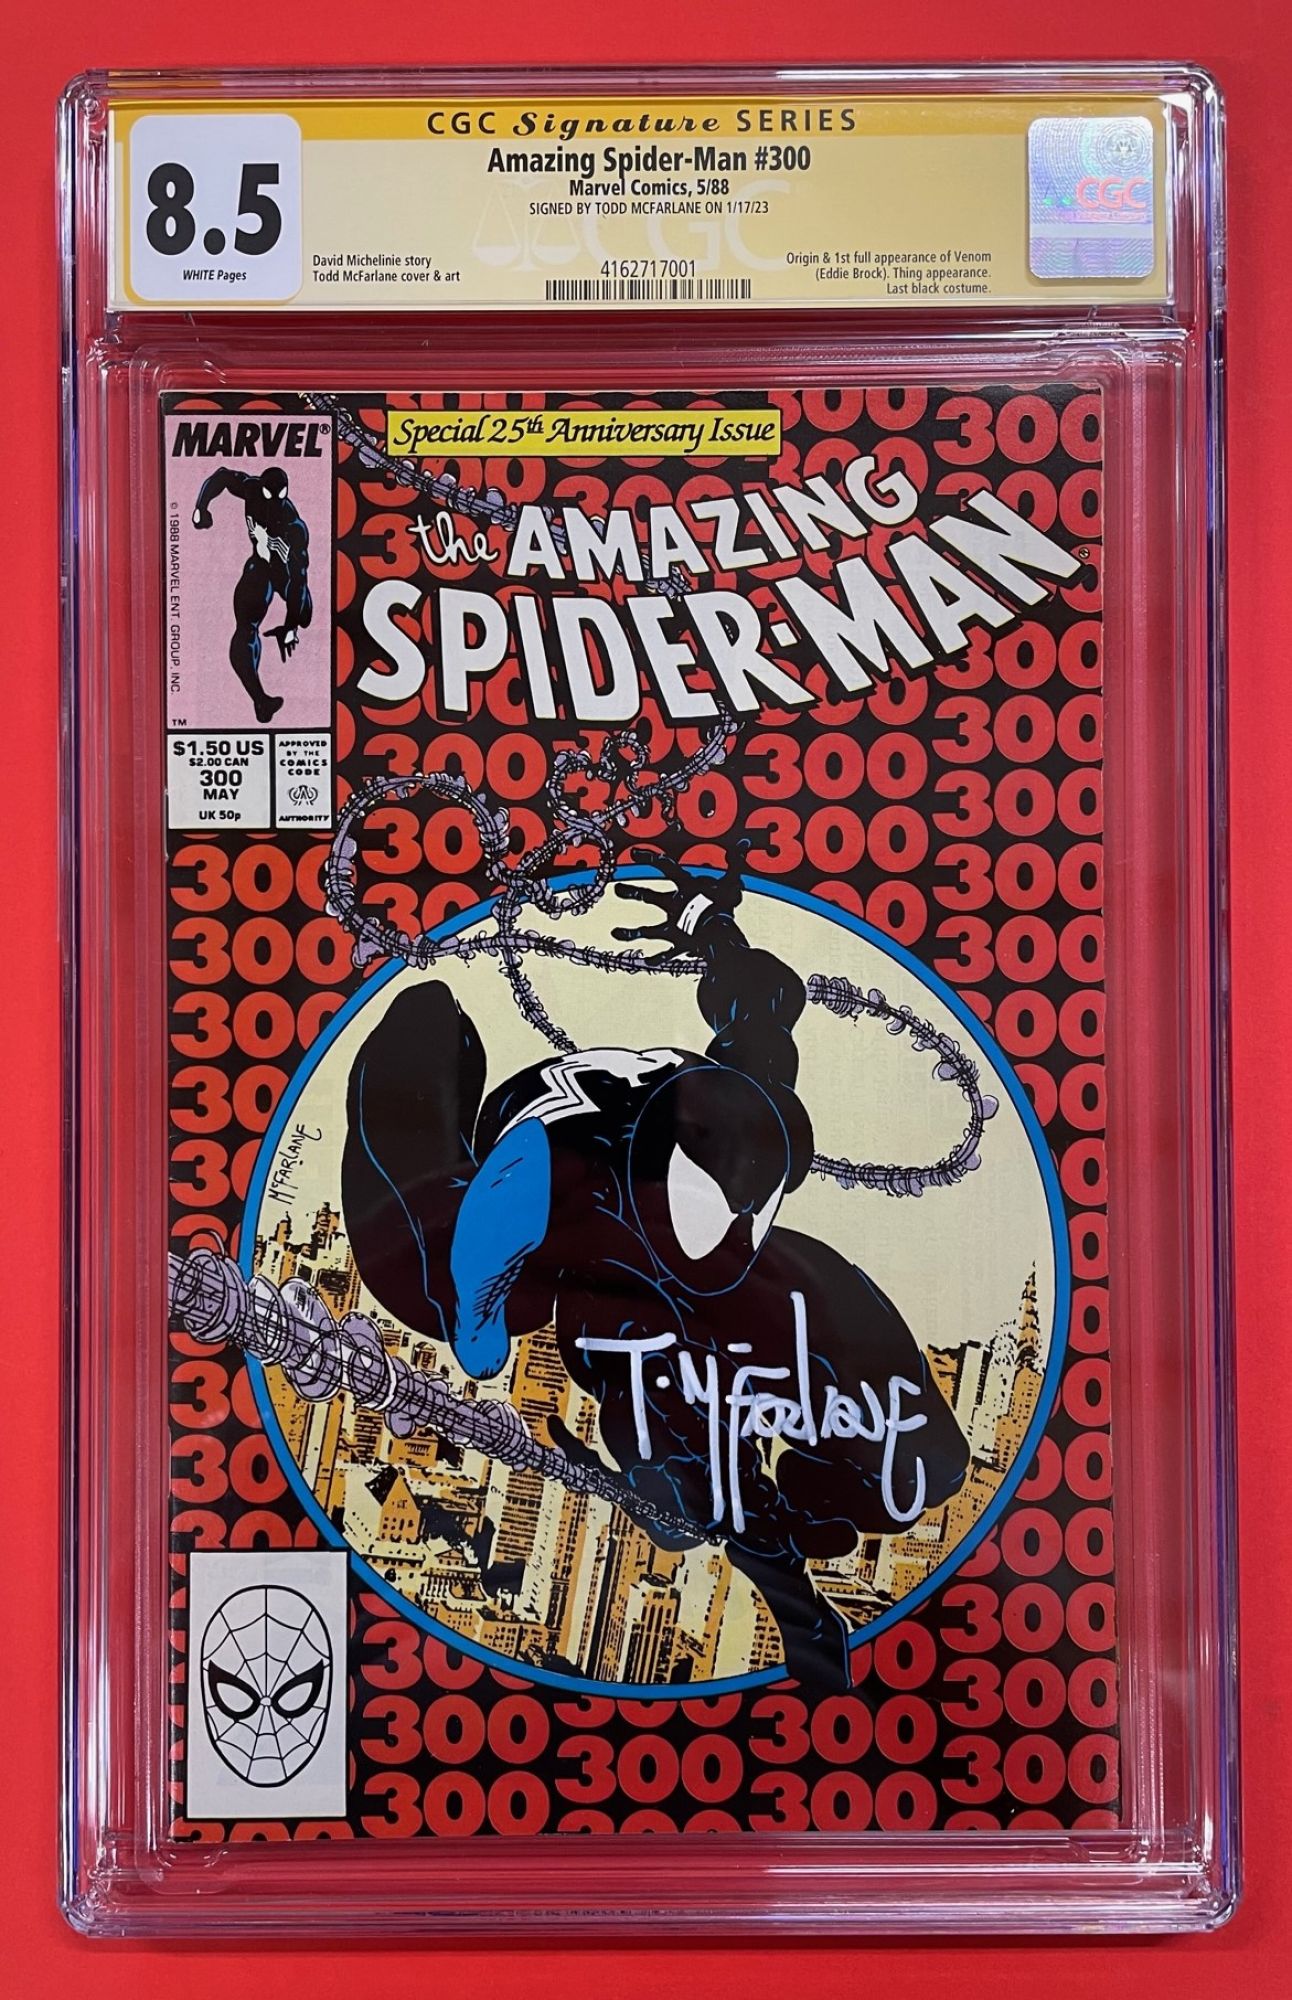 Amazing Spider-Man #300, May 1988, 8.5 VF+, CGC Signed by Todd McFarlane